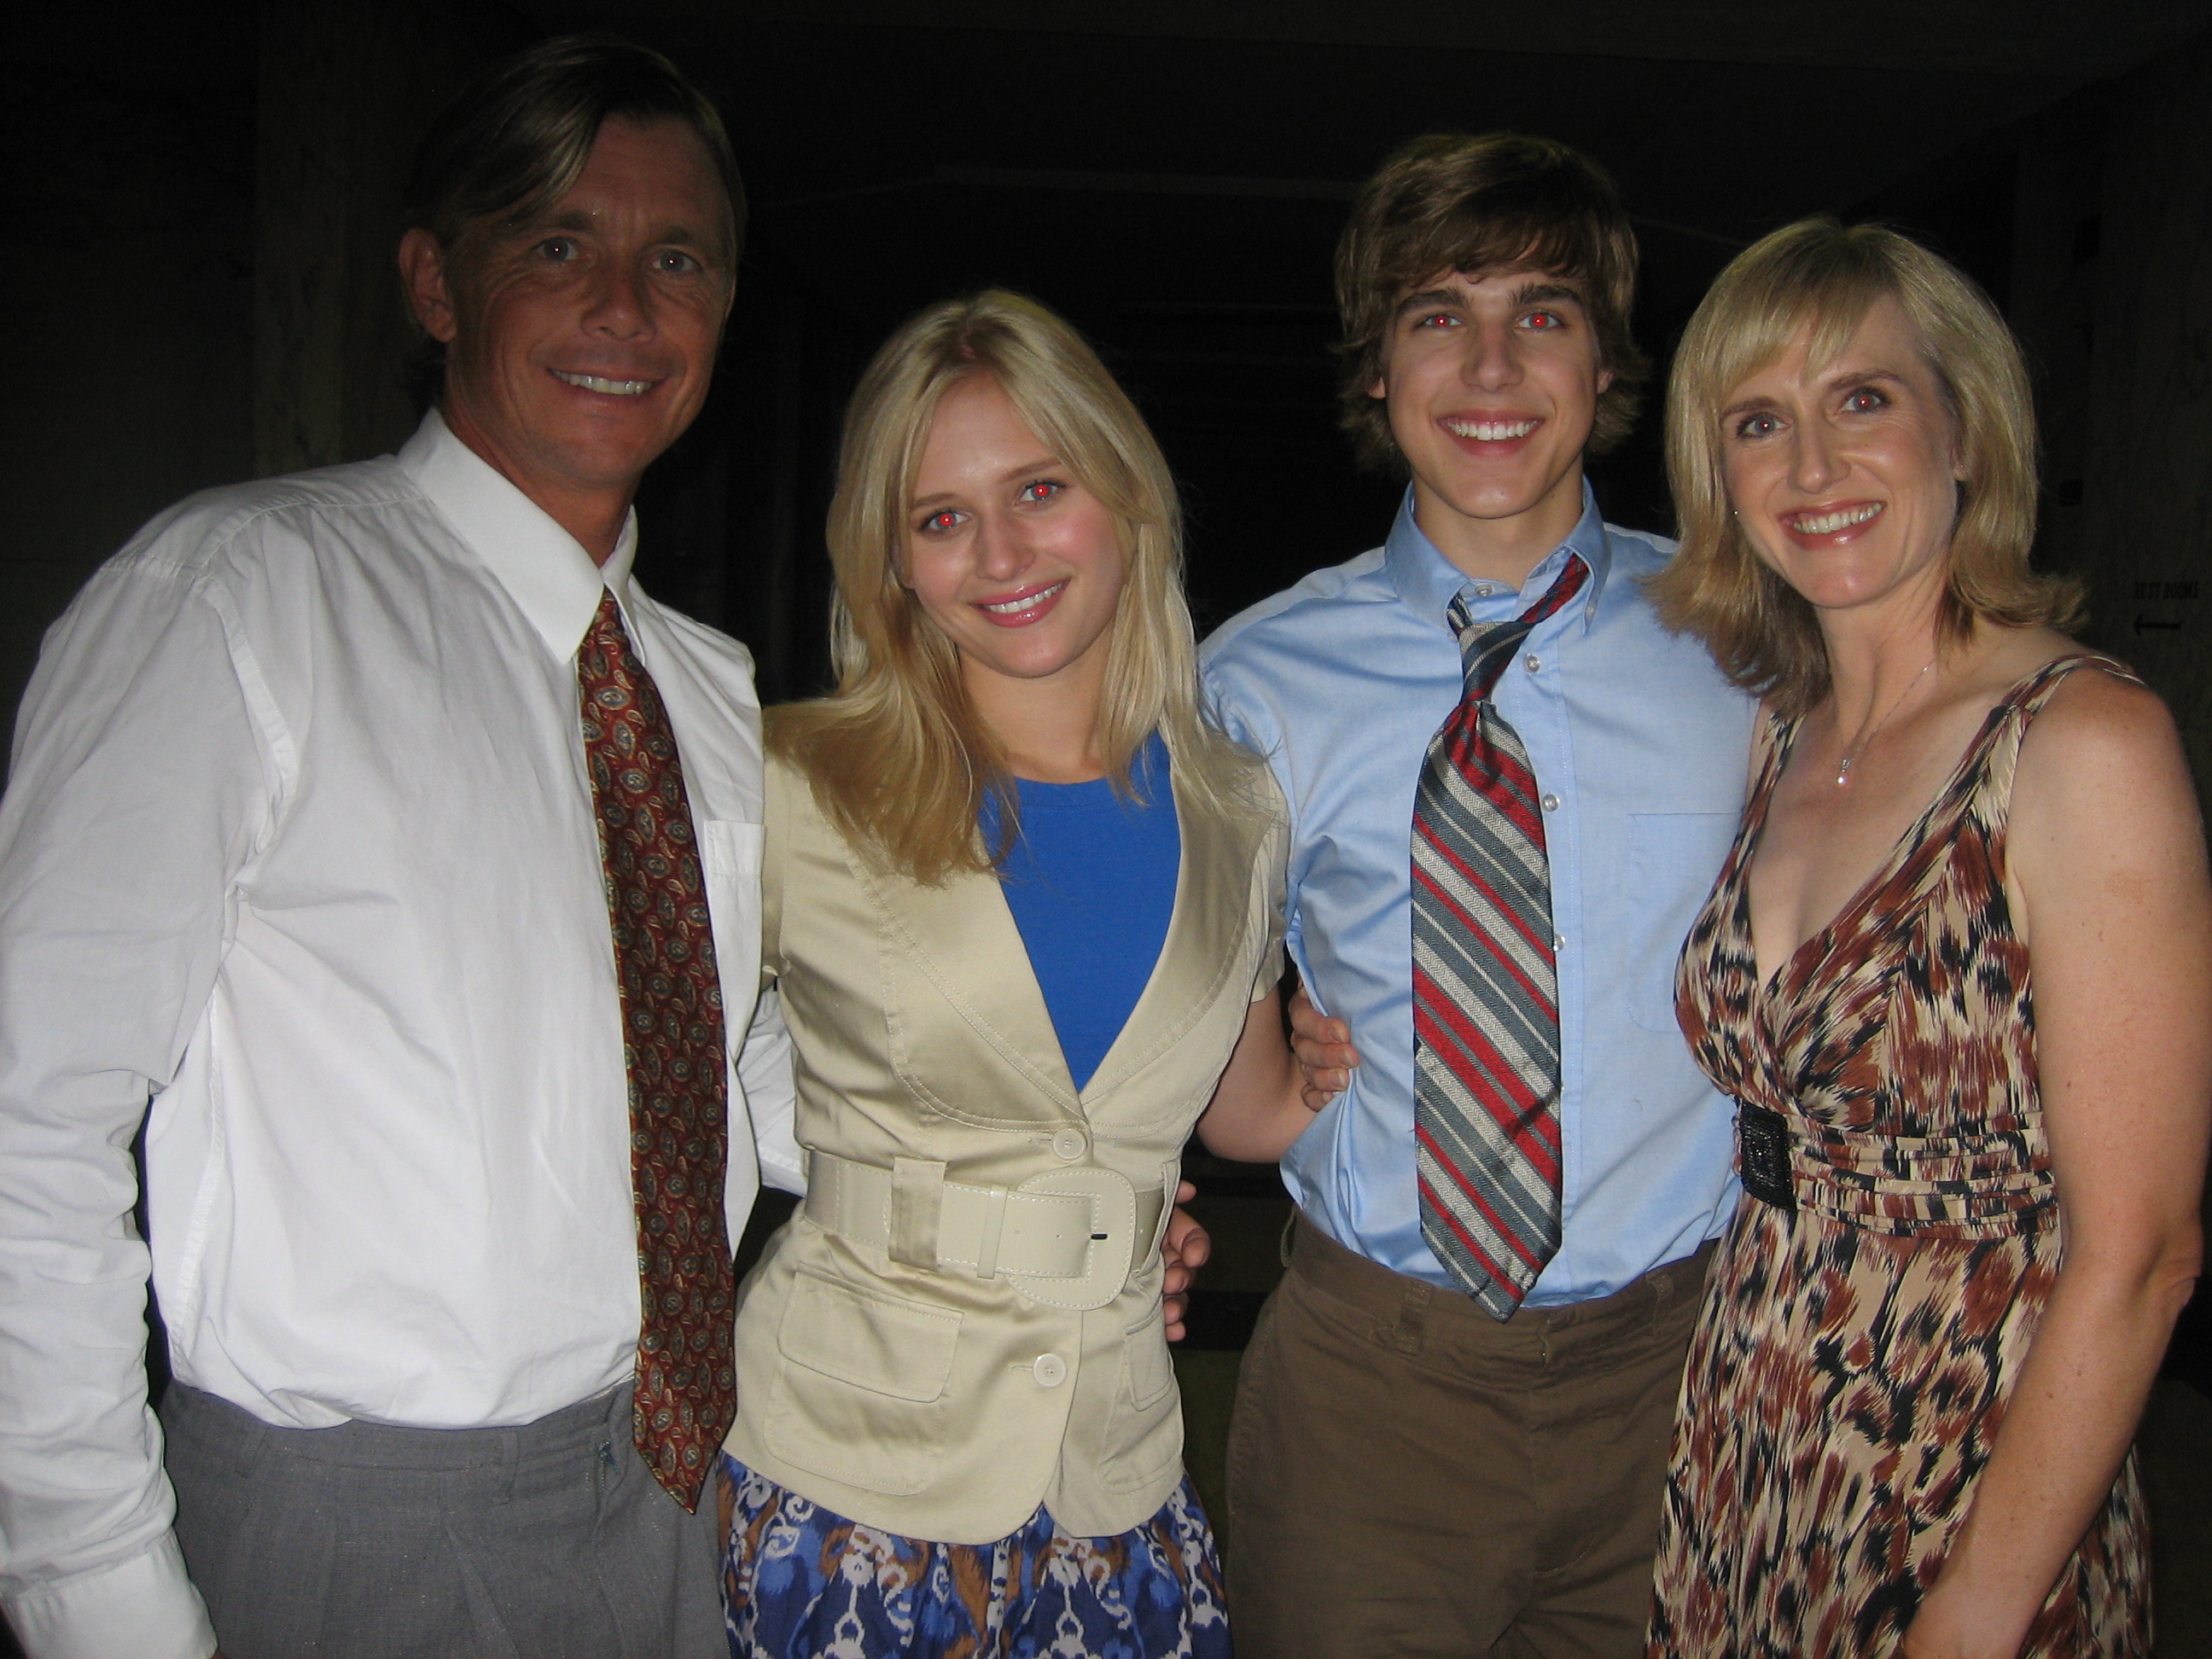 Christopher Atkins, Carly Schroder, Cody Linley, Julie Janney in FORGET ME NOT